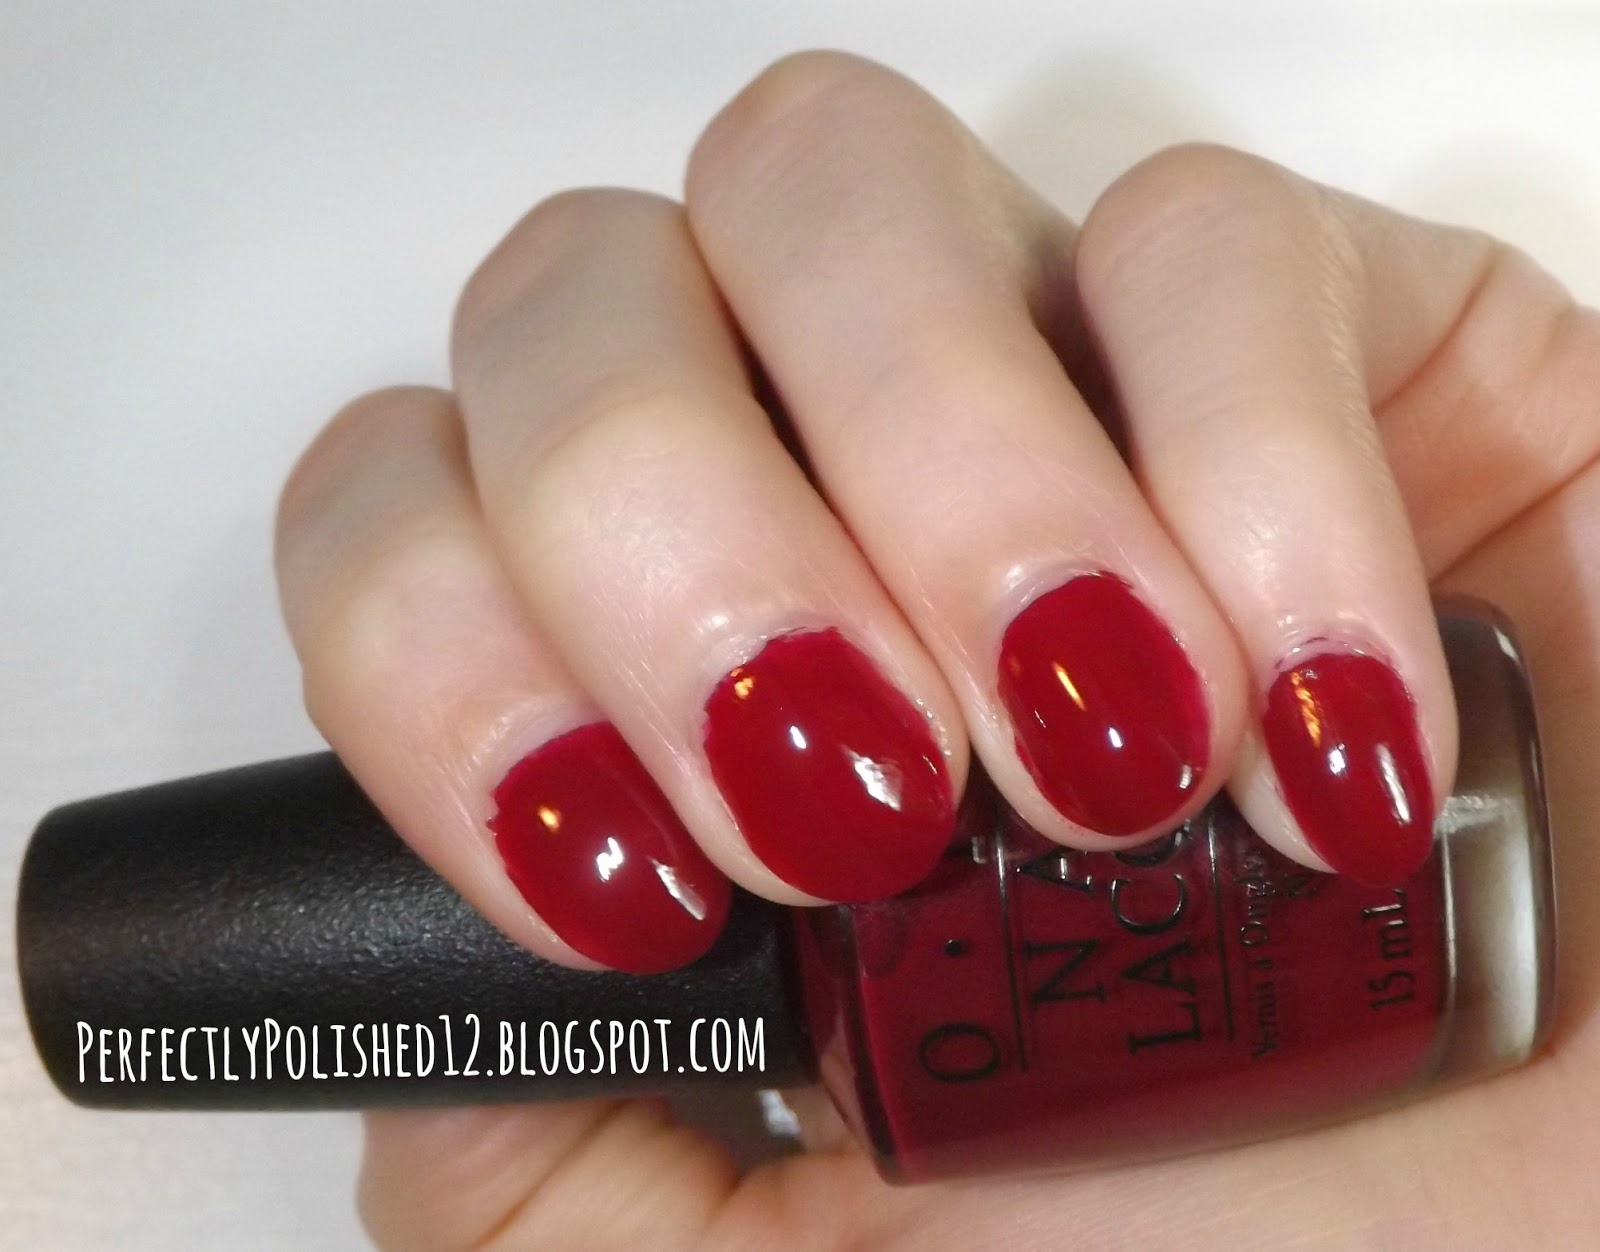 4. OPI Nail Lacquer in "Malaga Wine" - wide 1